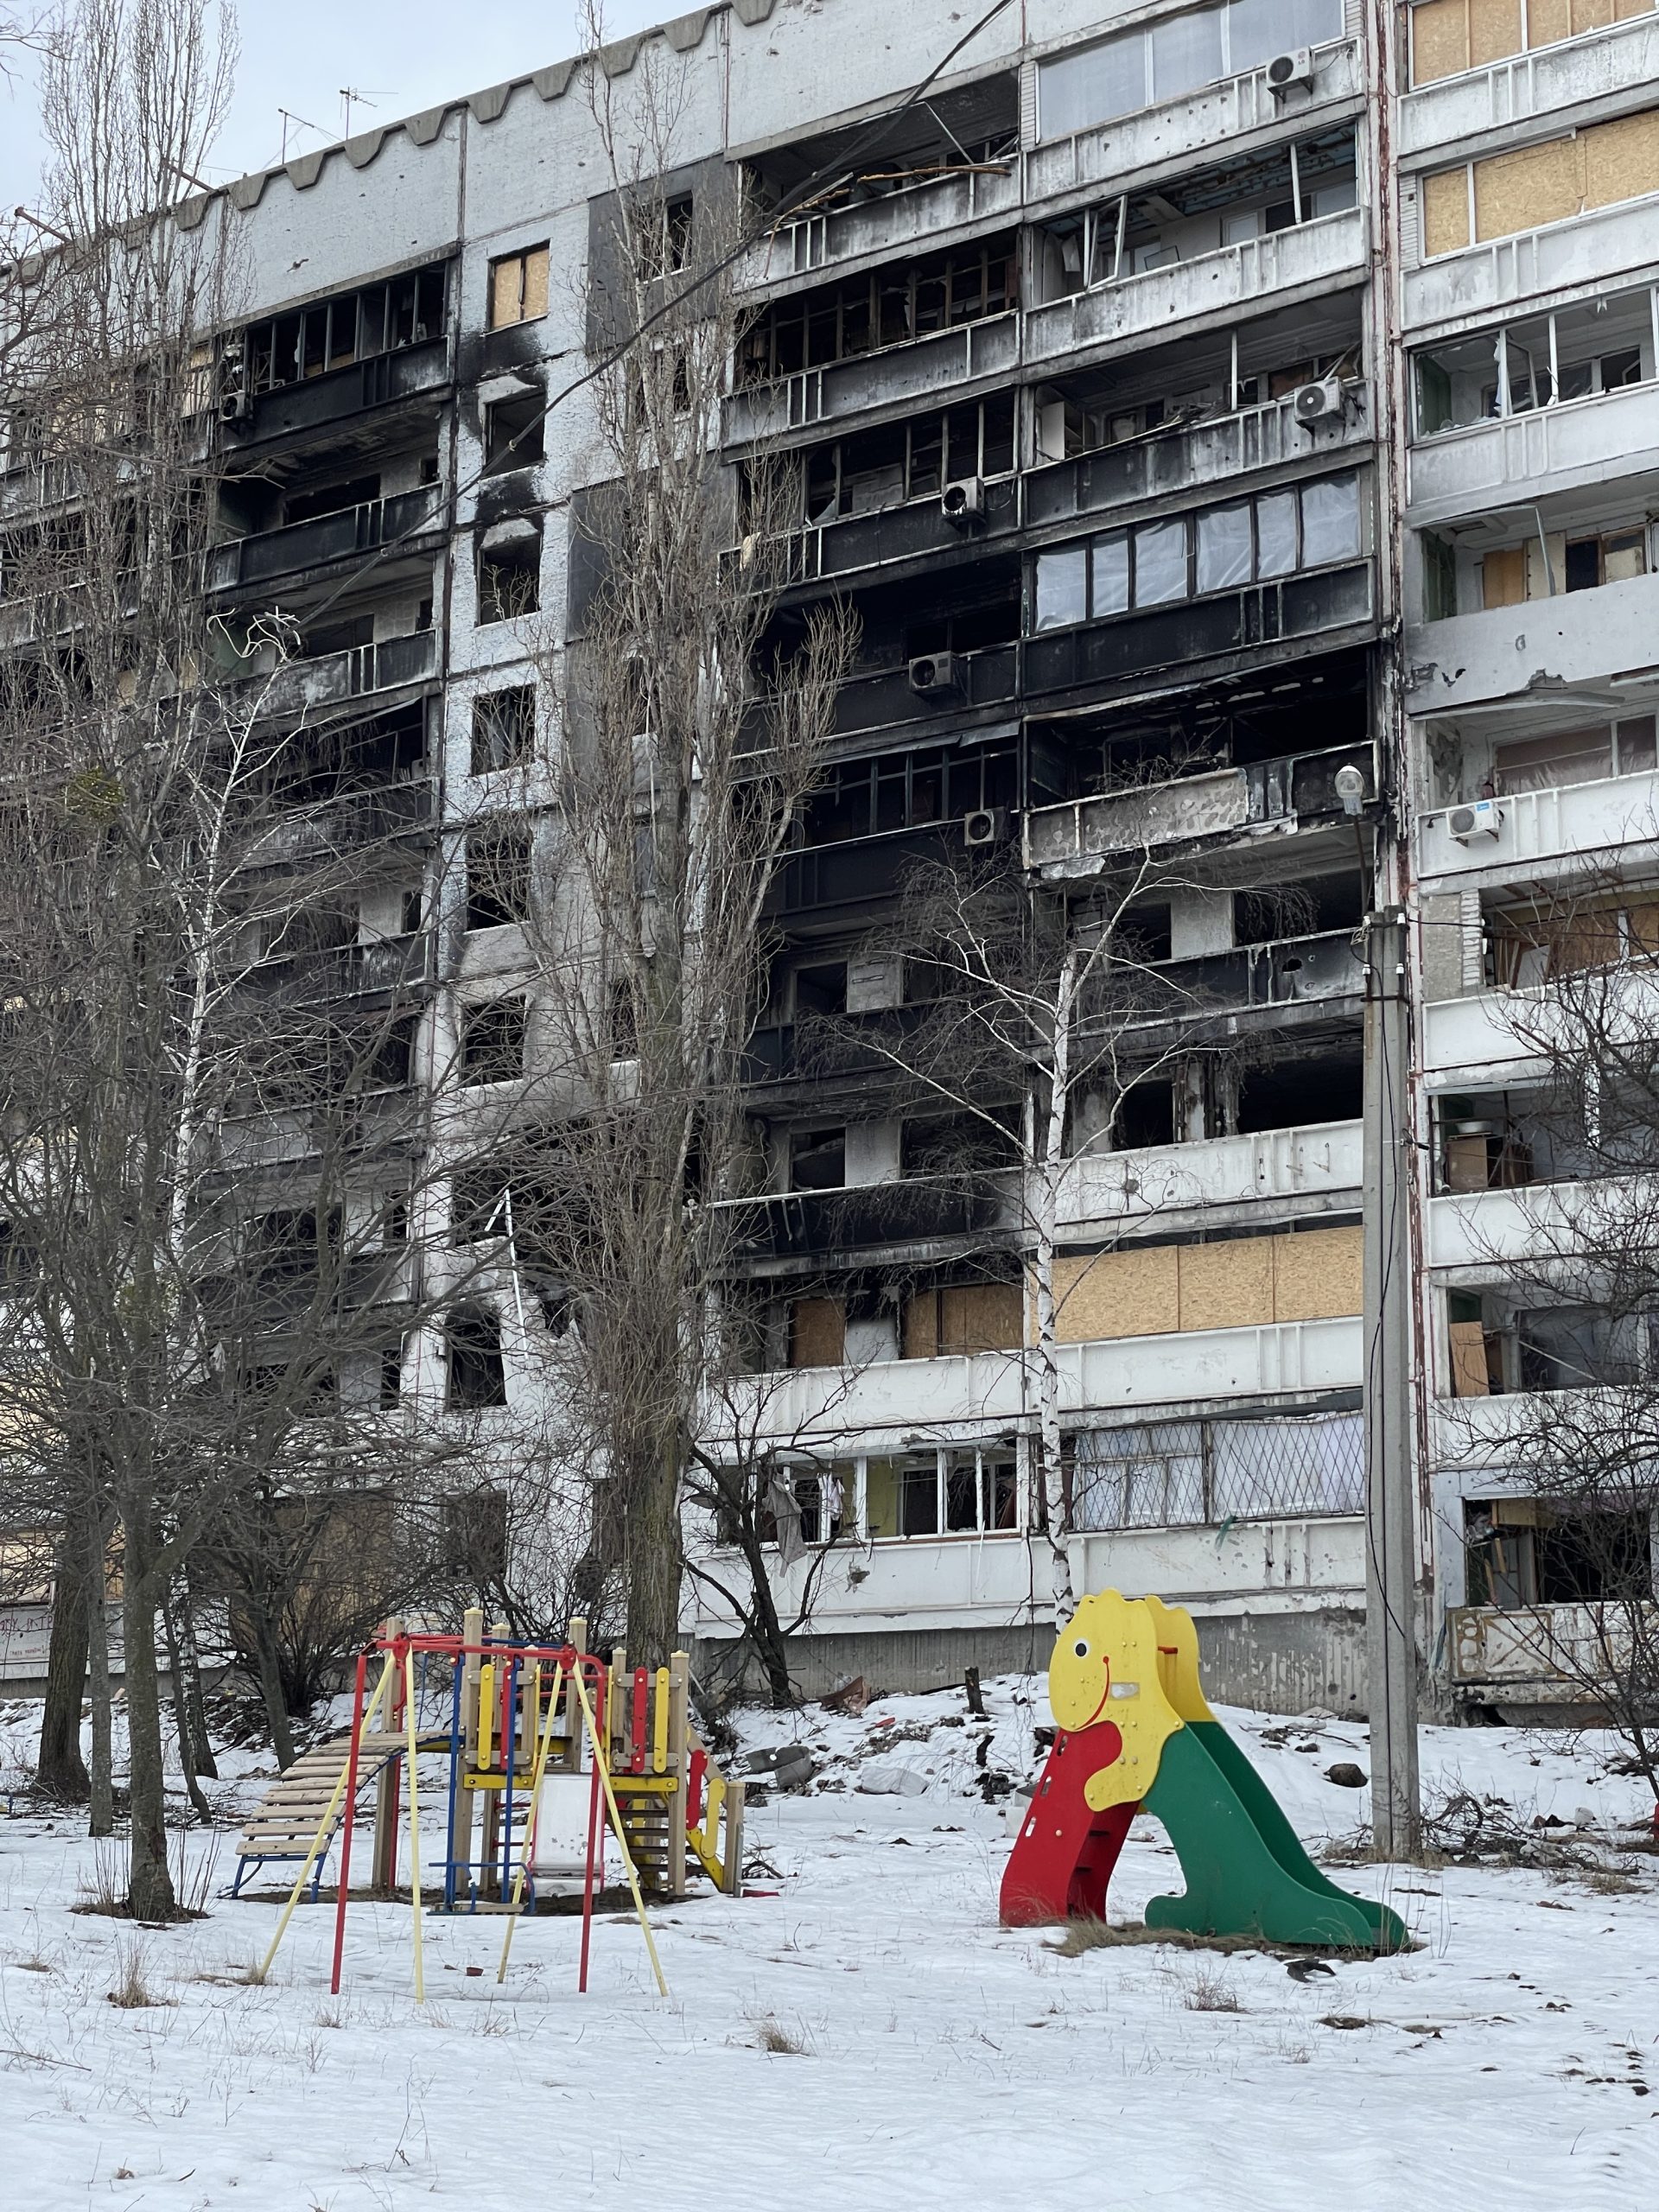 Kharkiv. Children's playground near a residential building in Pivnichna Saltivka. The building was shelled by the Russians several times, as a result of which it almost completely burned down. Photo was taken on on Feb 20, 2023 by Kateryna Svid.